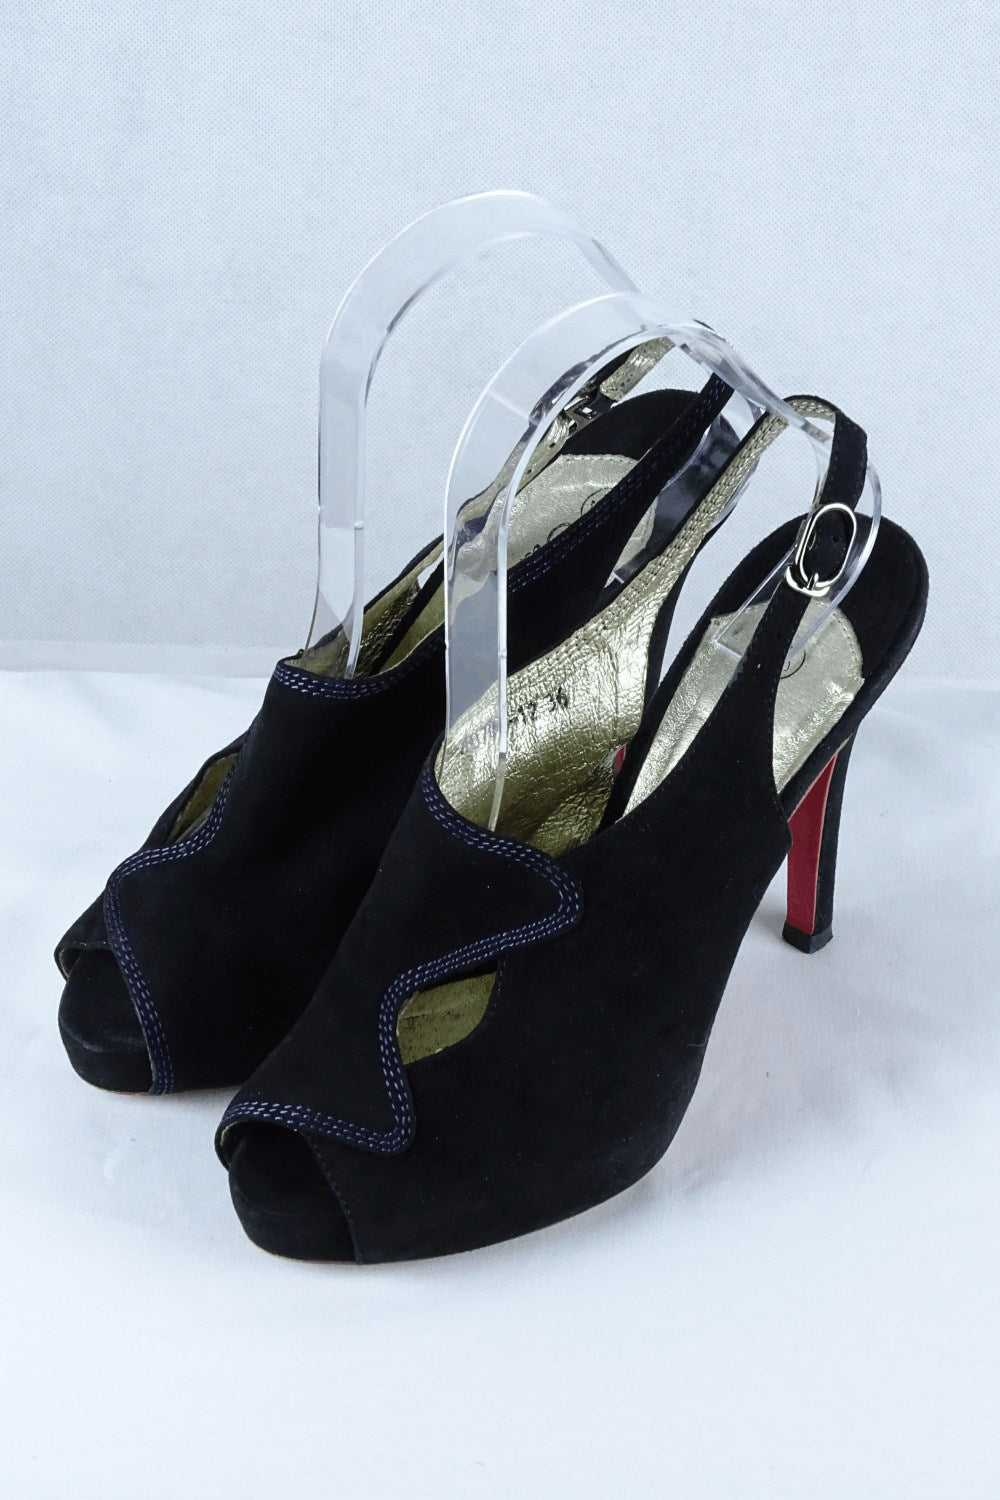 Graciano Black Shoes With Red Heel 6 AU